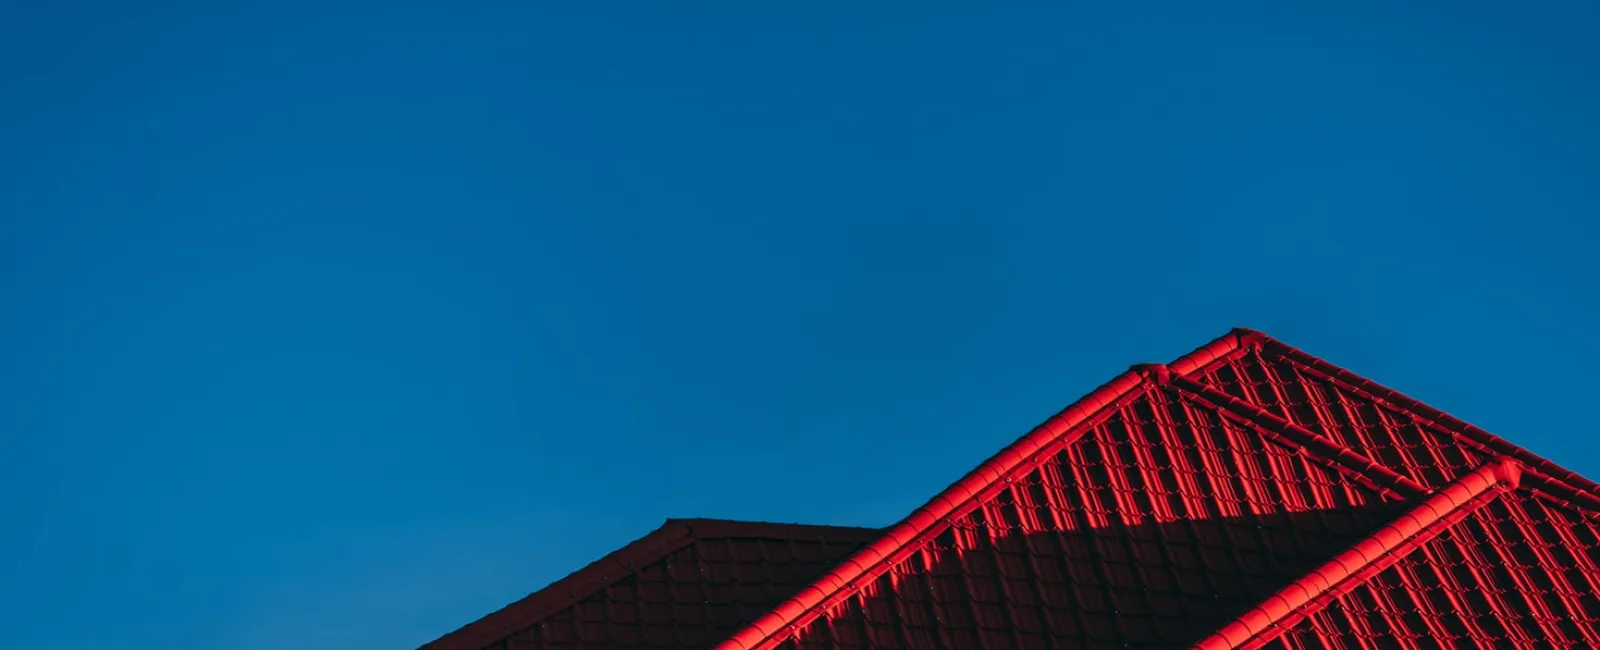 What You Should Know about Metal Roofing and the Noise It Makes